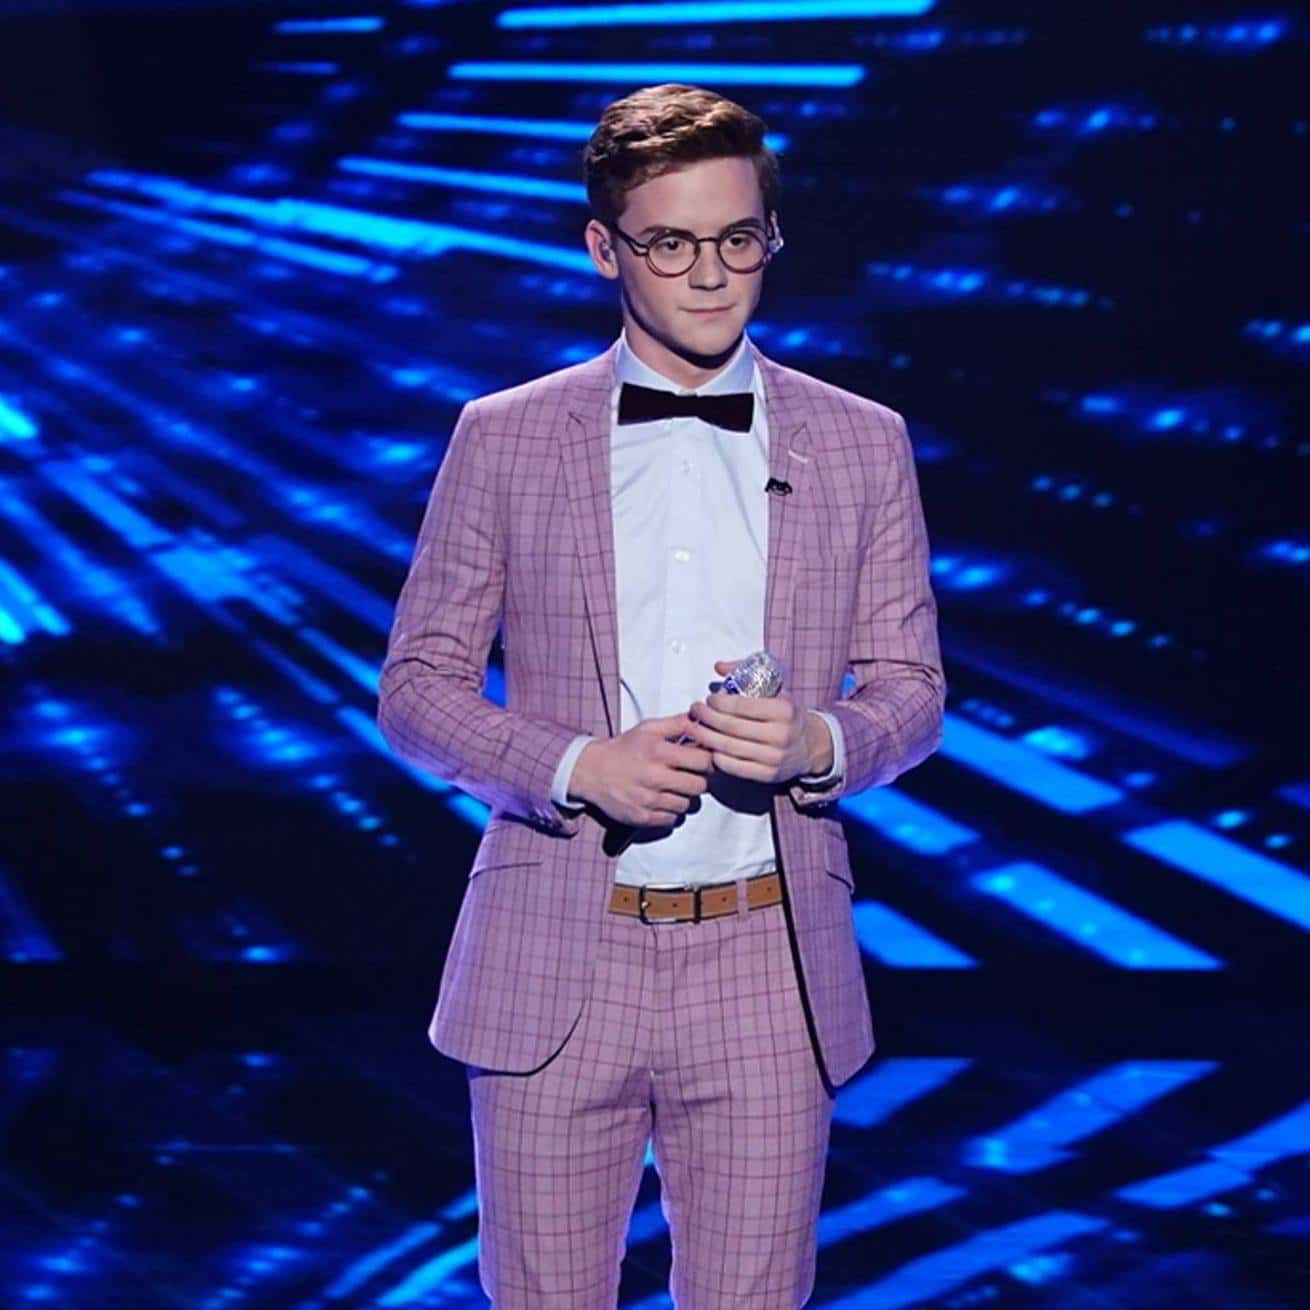 Walker Burroughs sang a show tune from "The Sound of Music" on American Idol Sunday, April 14. 